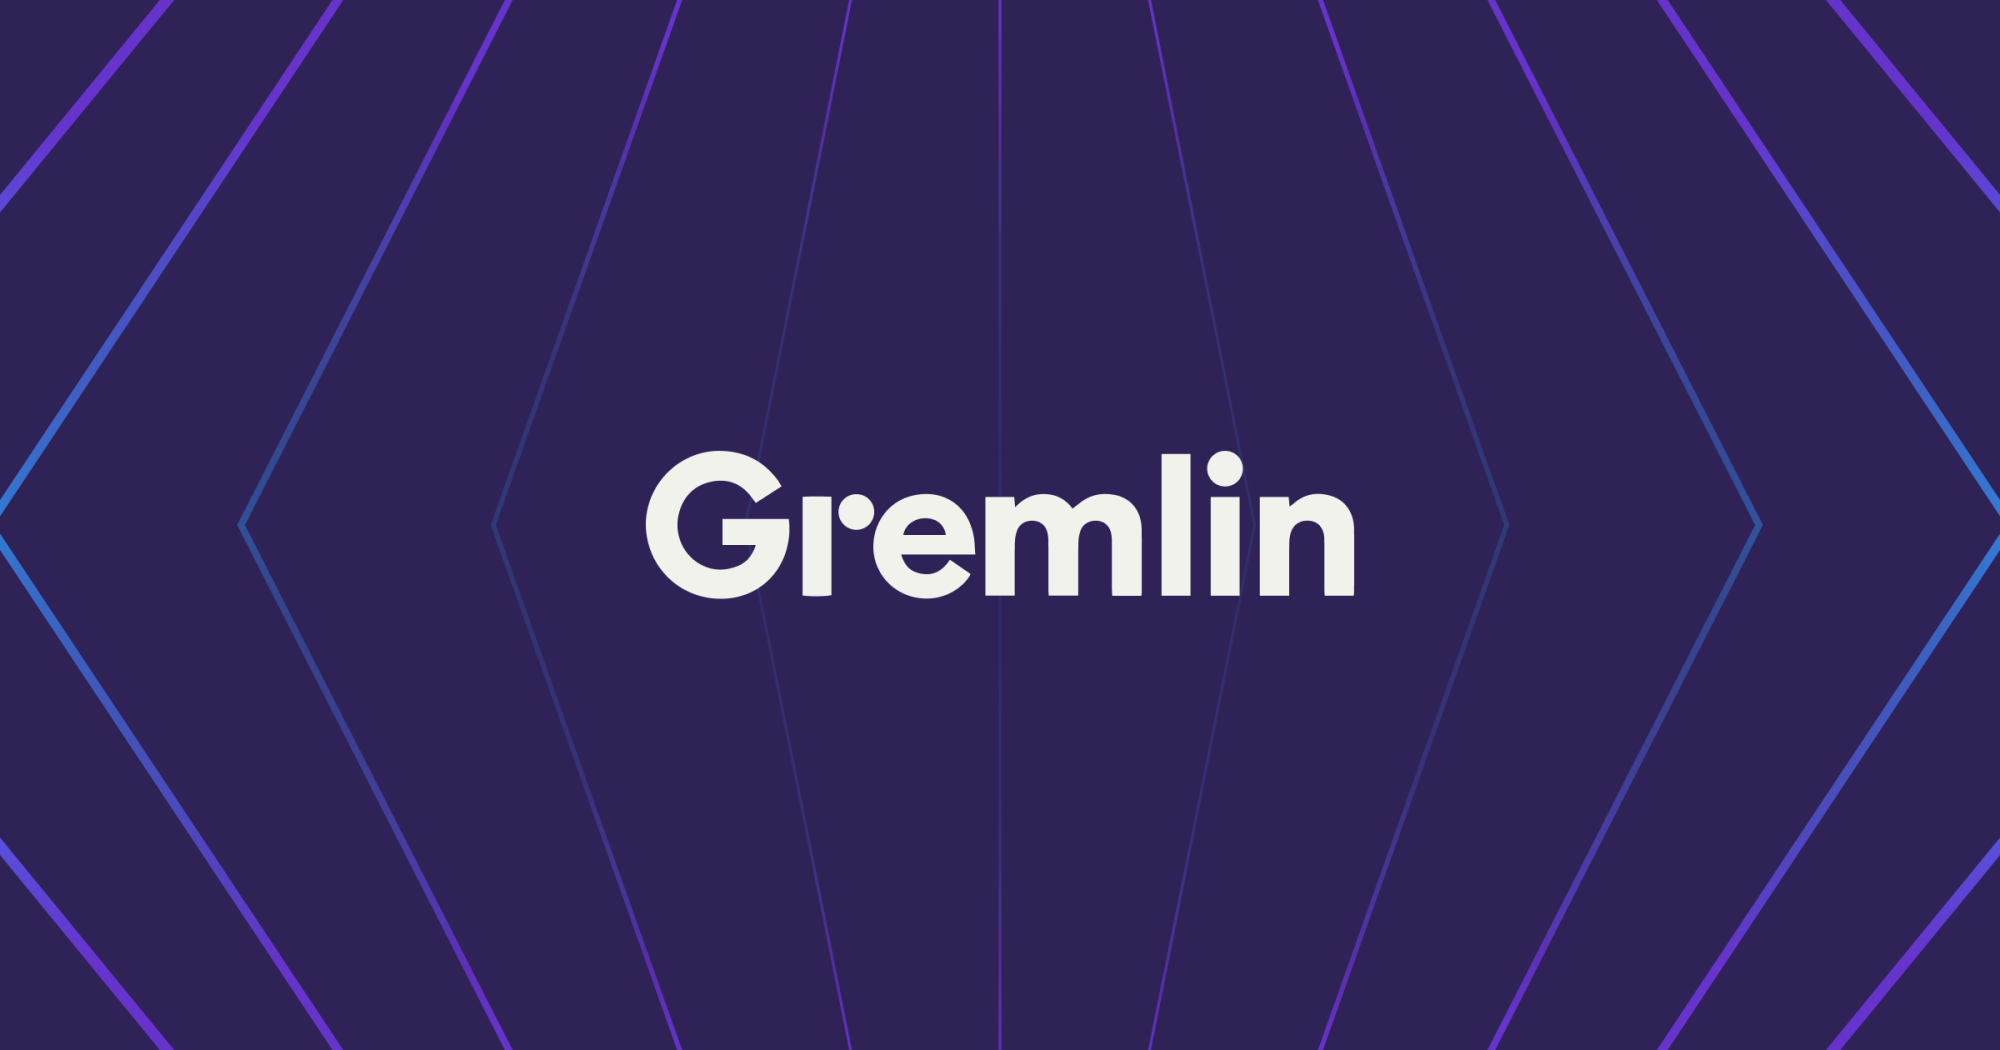 Launch and halt Gremlin Chaos Engineering attacks and load testing from JMeter